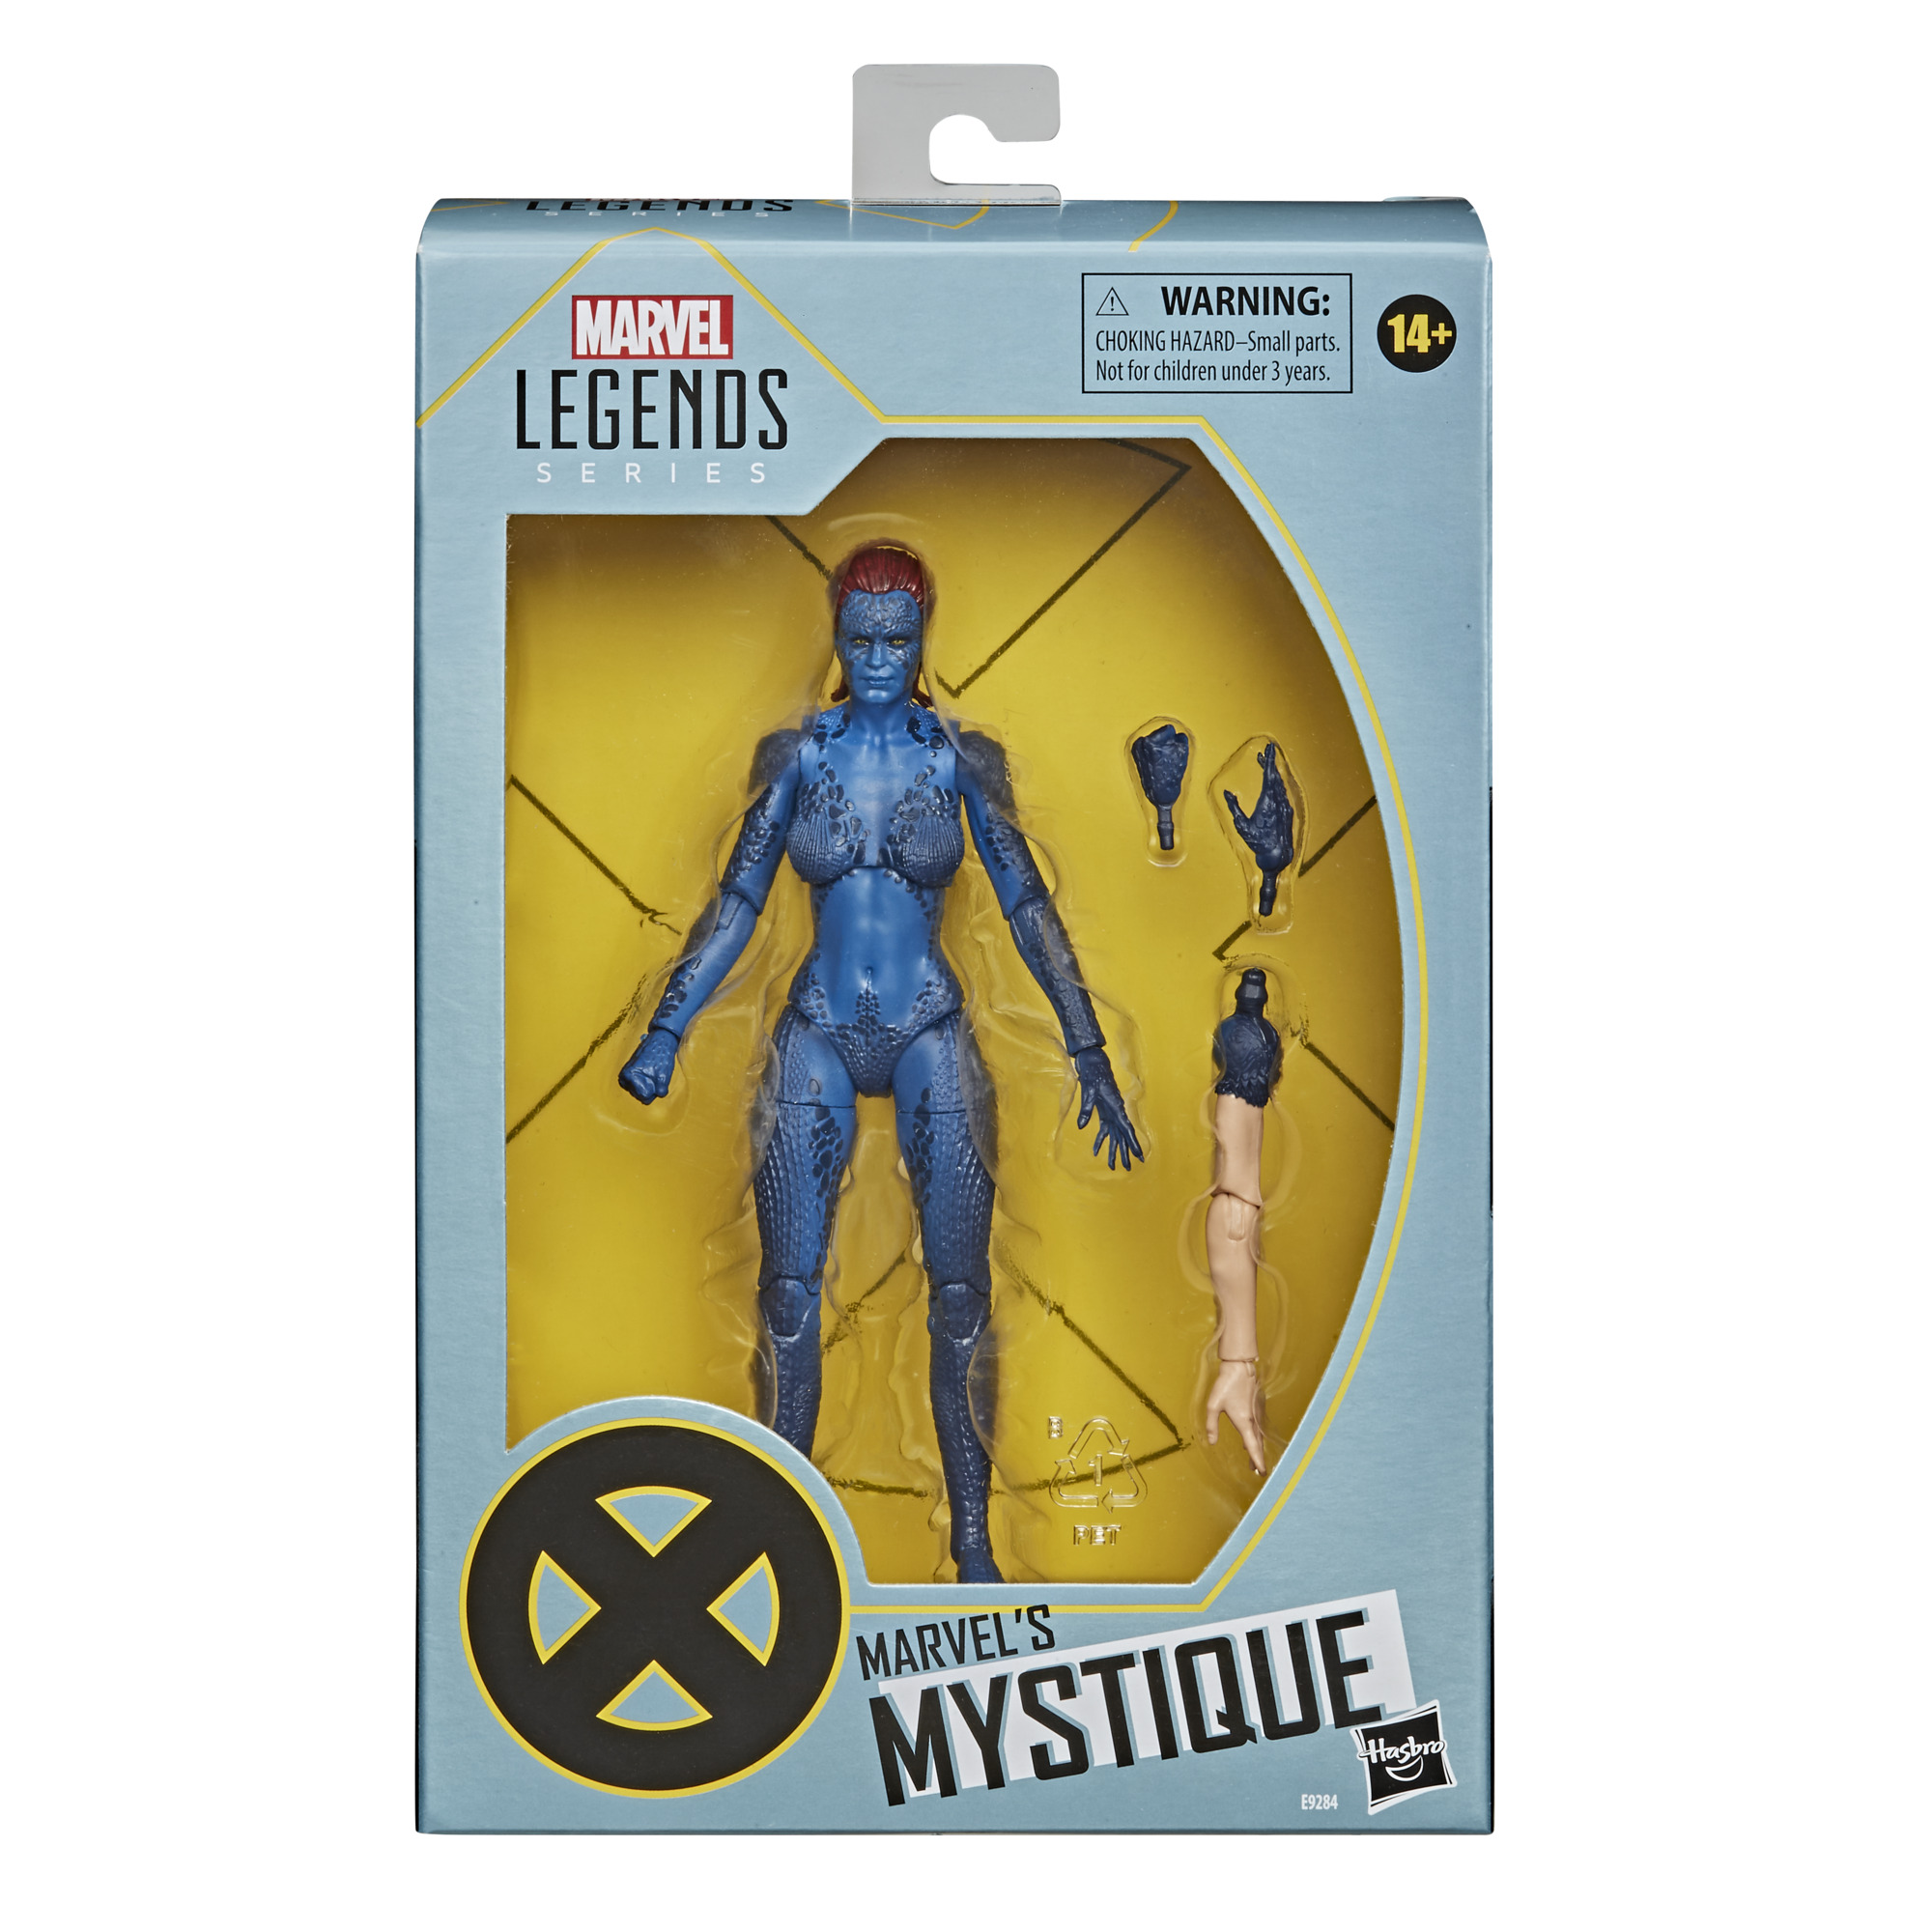 Mystique in package